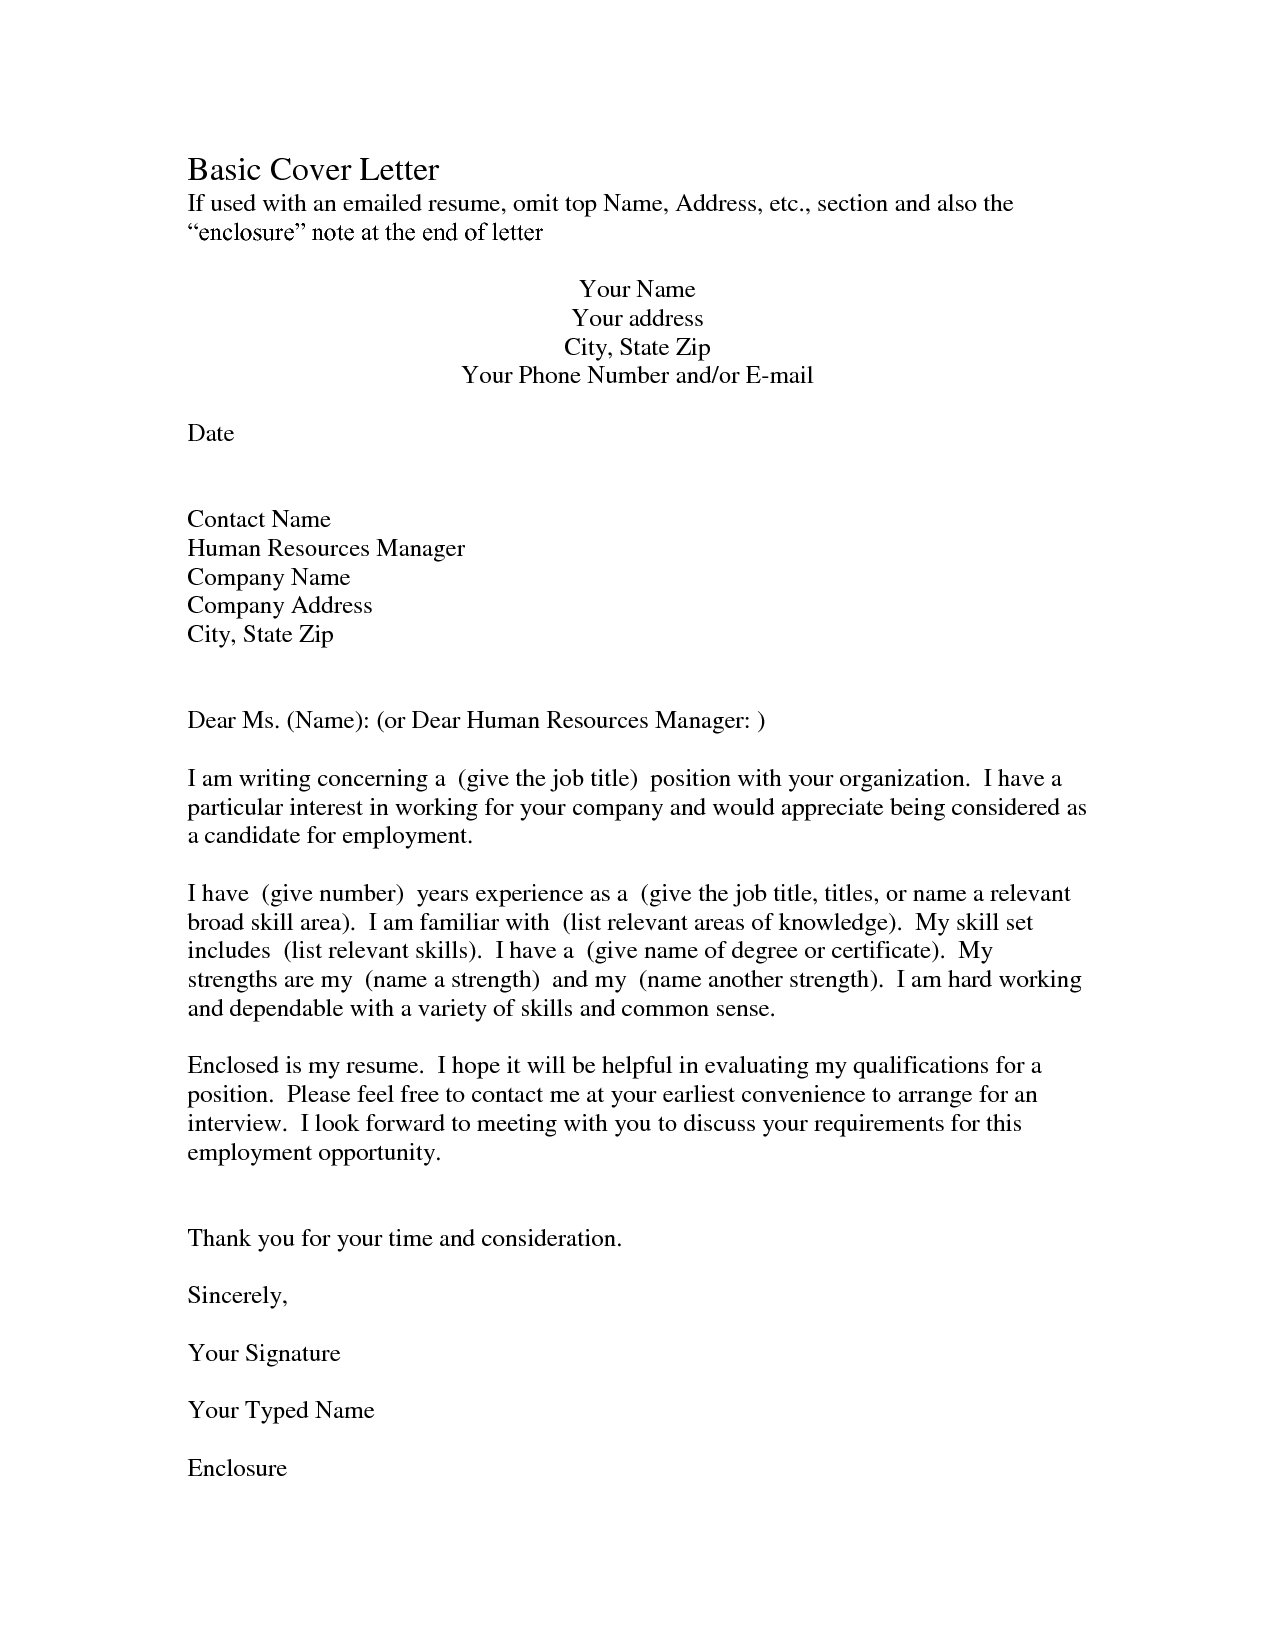 Proof Of Loss Of Coverage Letter Template - This Cover Letter Sample Shows How A Resumes for Teachers Can Help